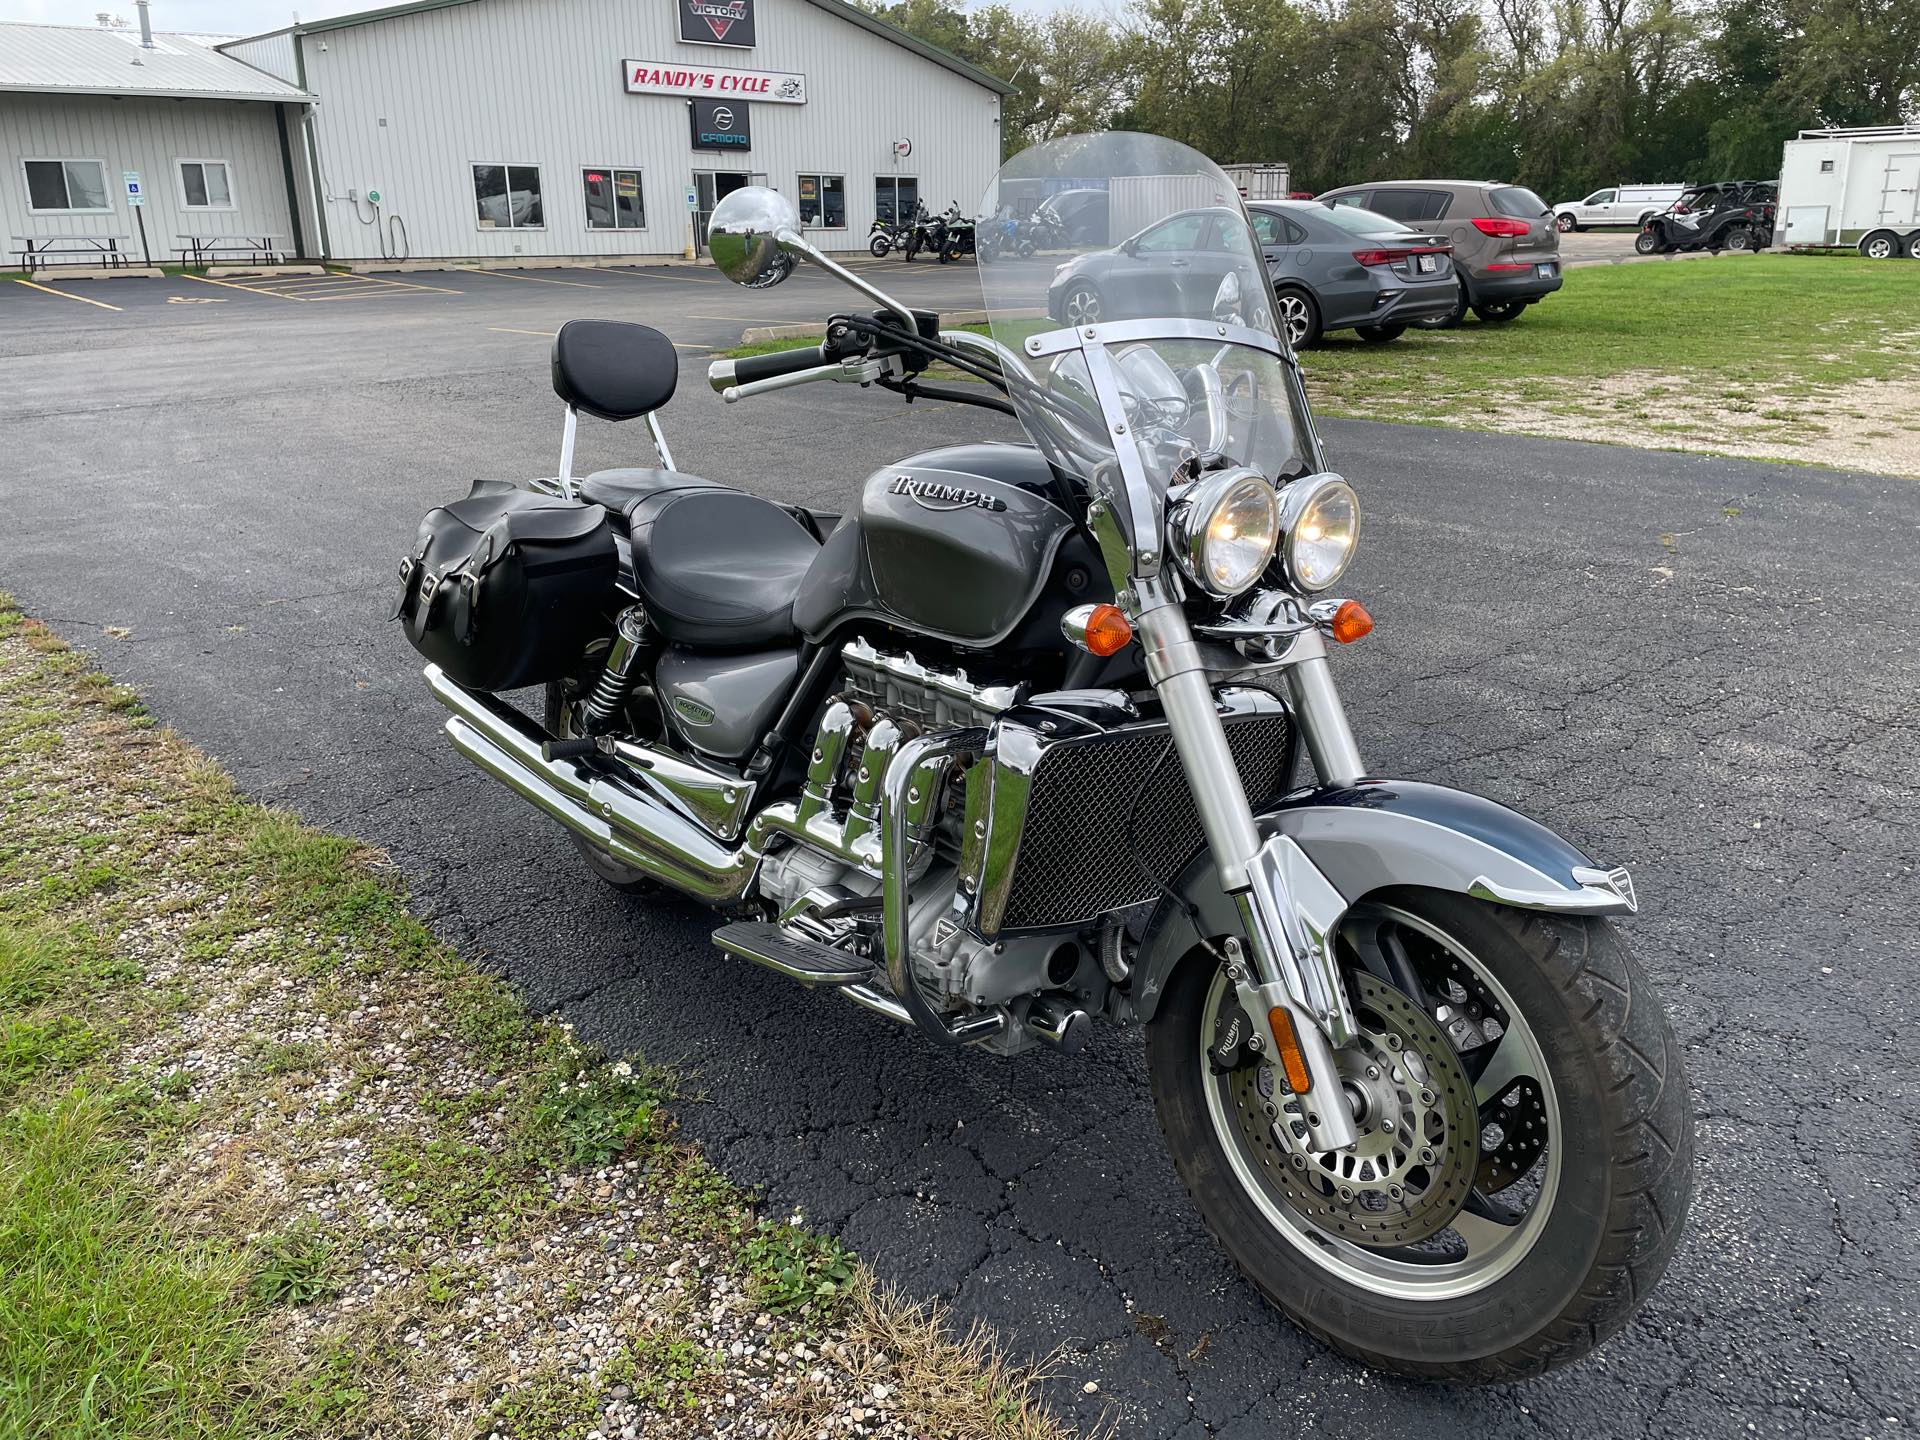 2007 Triumph Rocket III Classic Tourer at Randy's Cycle